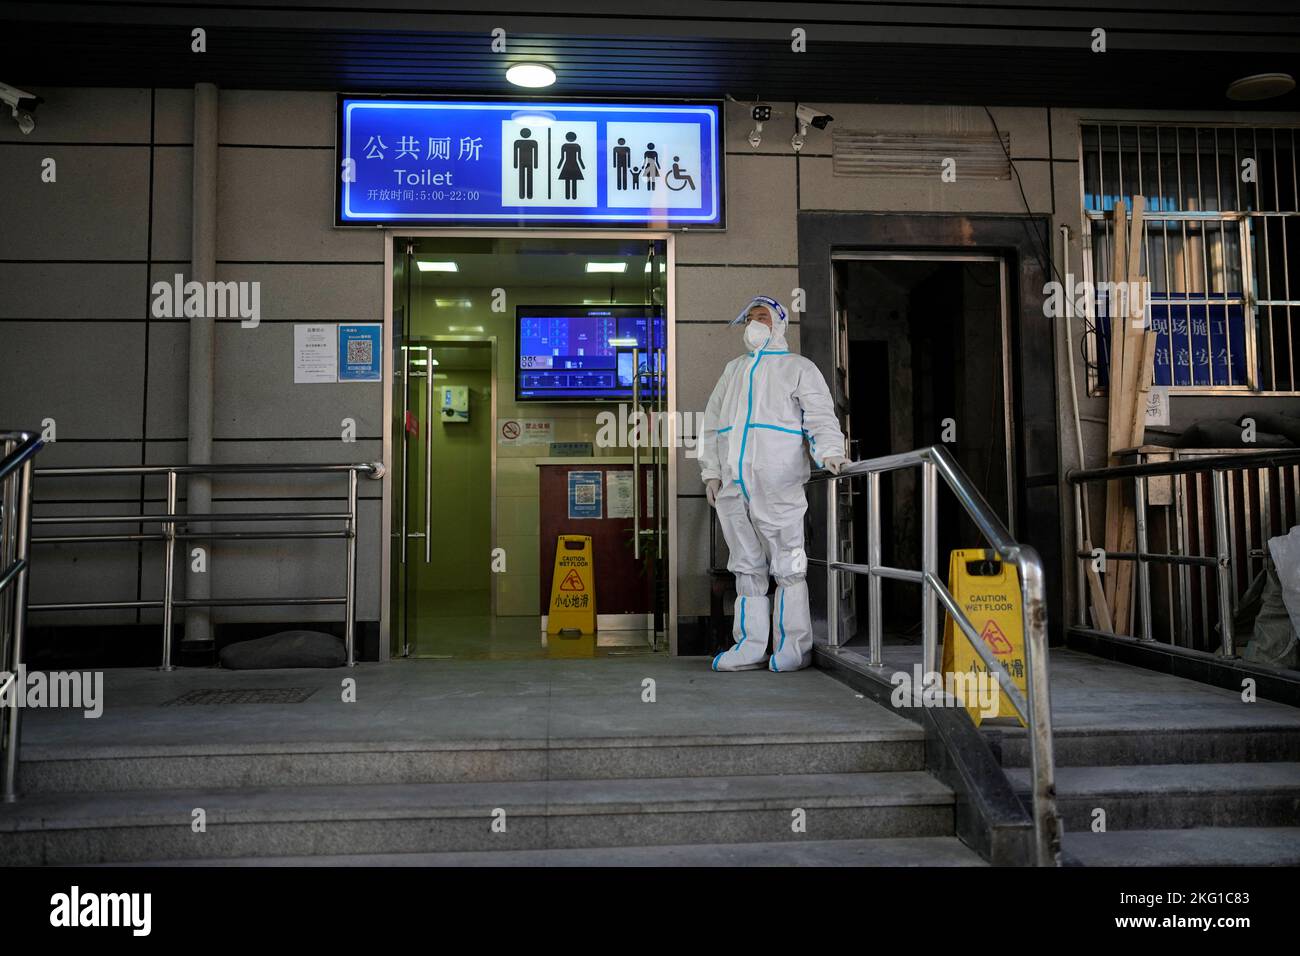 A worker in protective suit keeps a watch outside a public toilet to inspect the health code of visitors, amid the coronavirus disease (COVID-19) outbreak in Shanghai, China, November 21, 2022. REUTERS/Aly Song Stock Photo